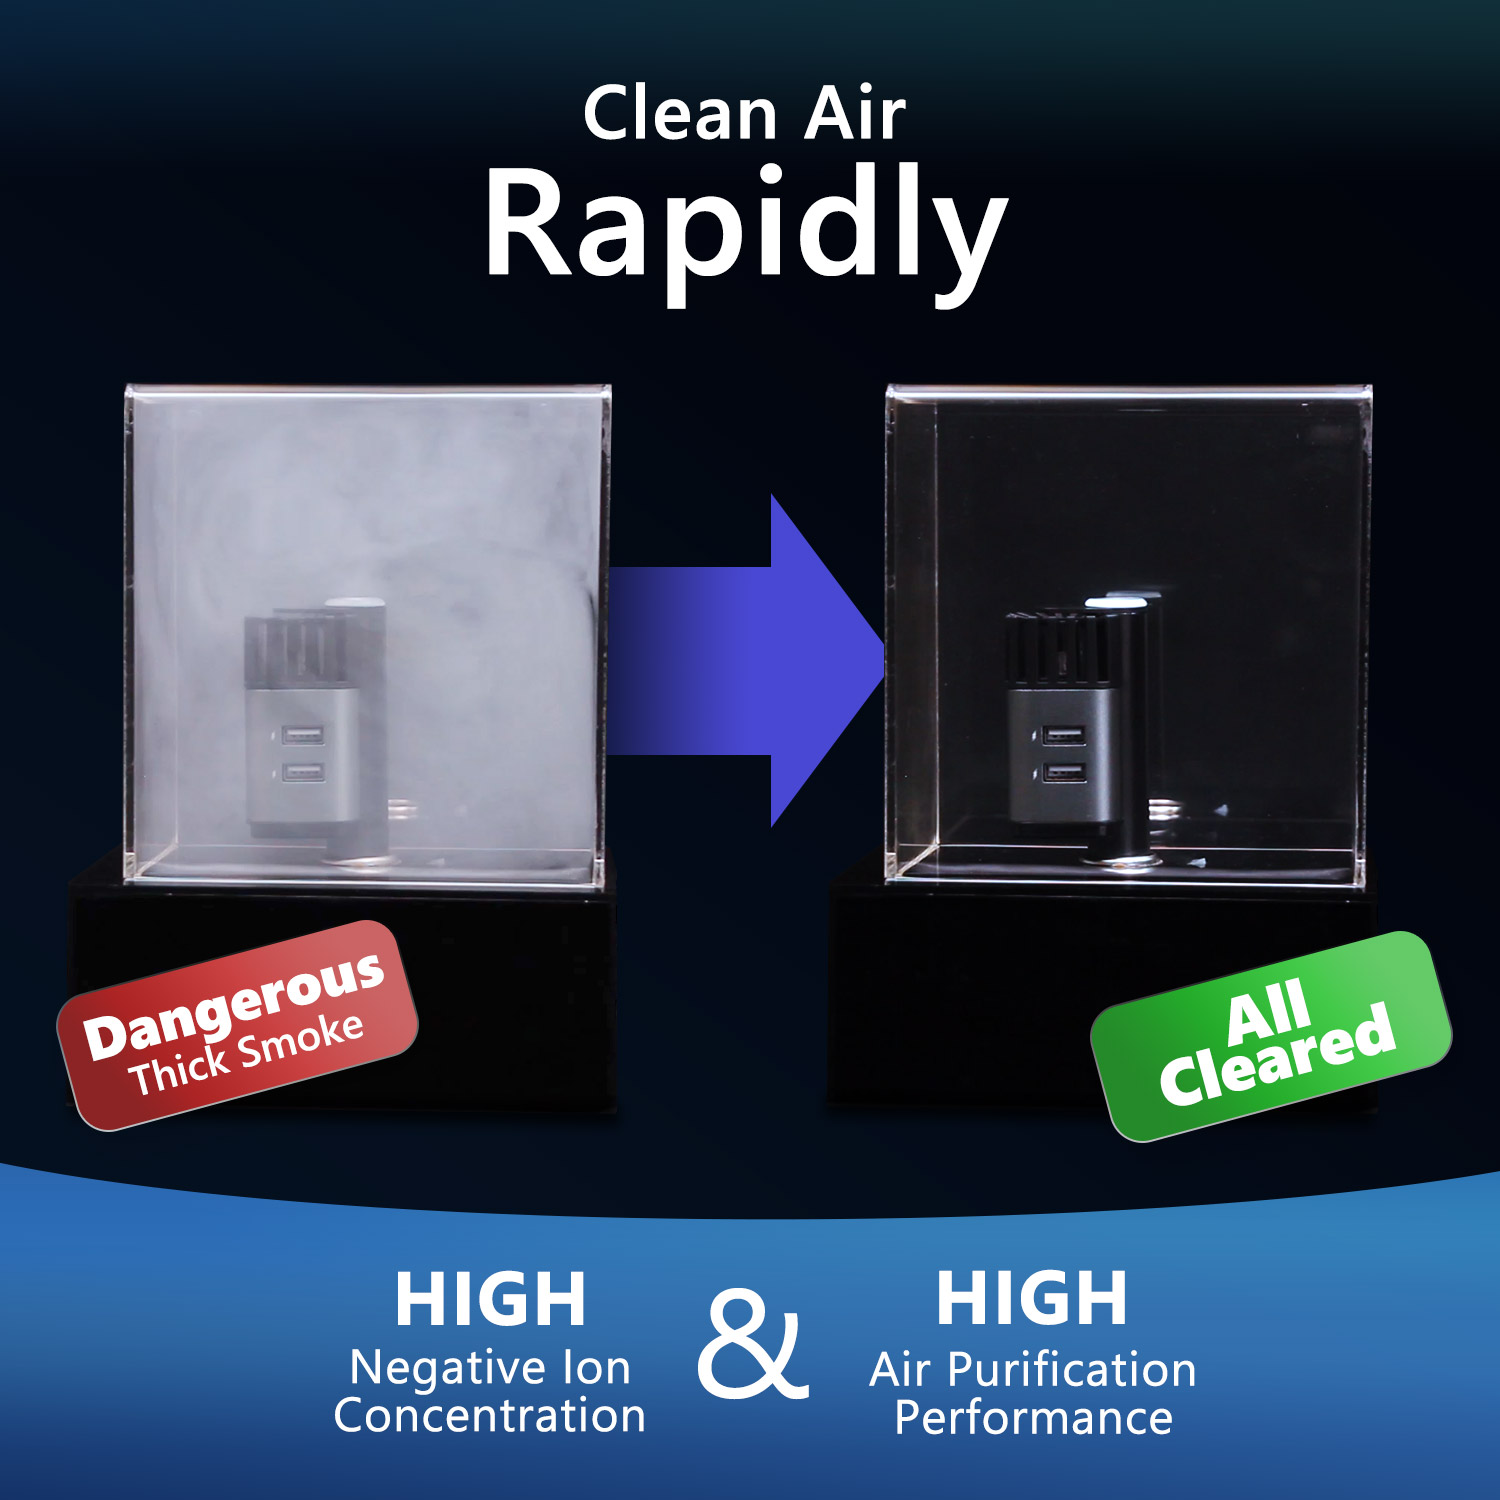 Smoke Removal Experiment - Purify Air Rapidly